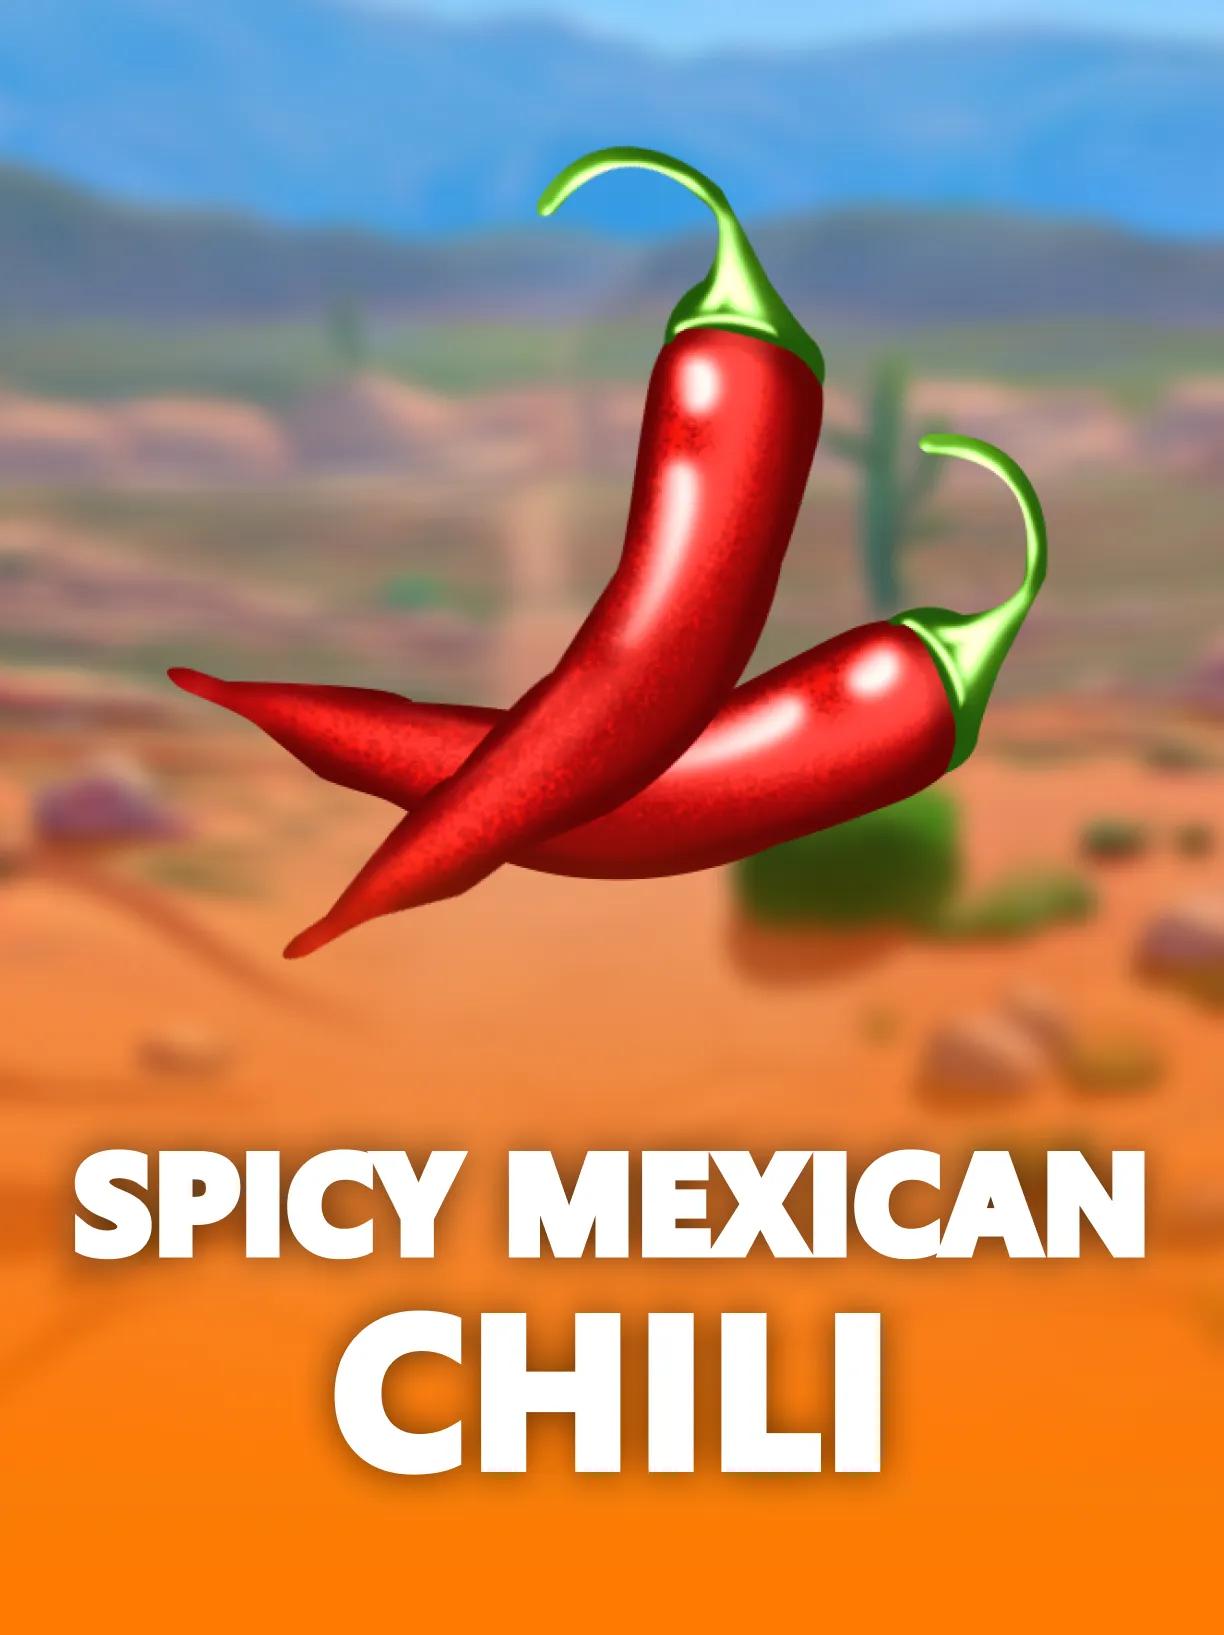 ug_Spicy_Mexican_Chili_square.webp